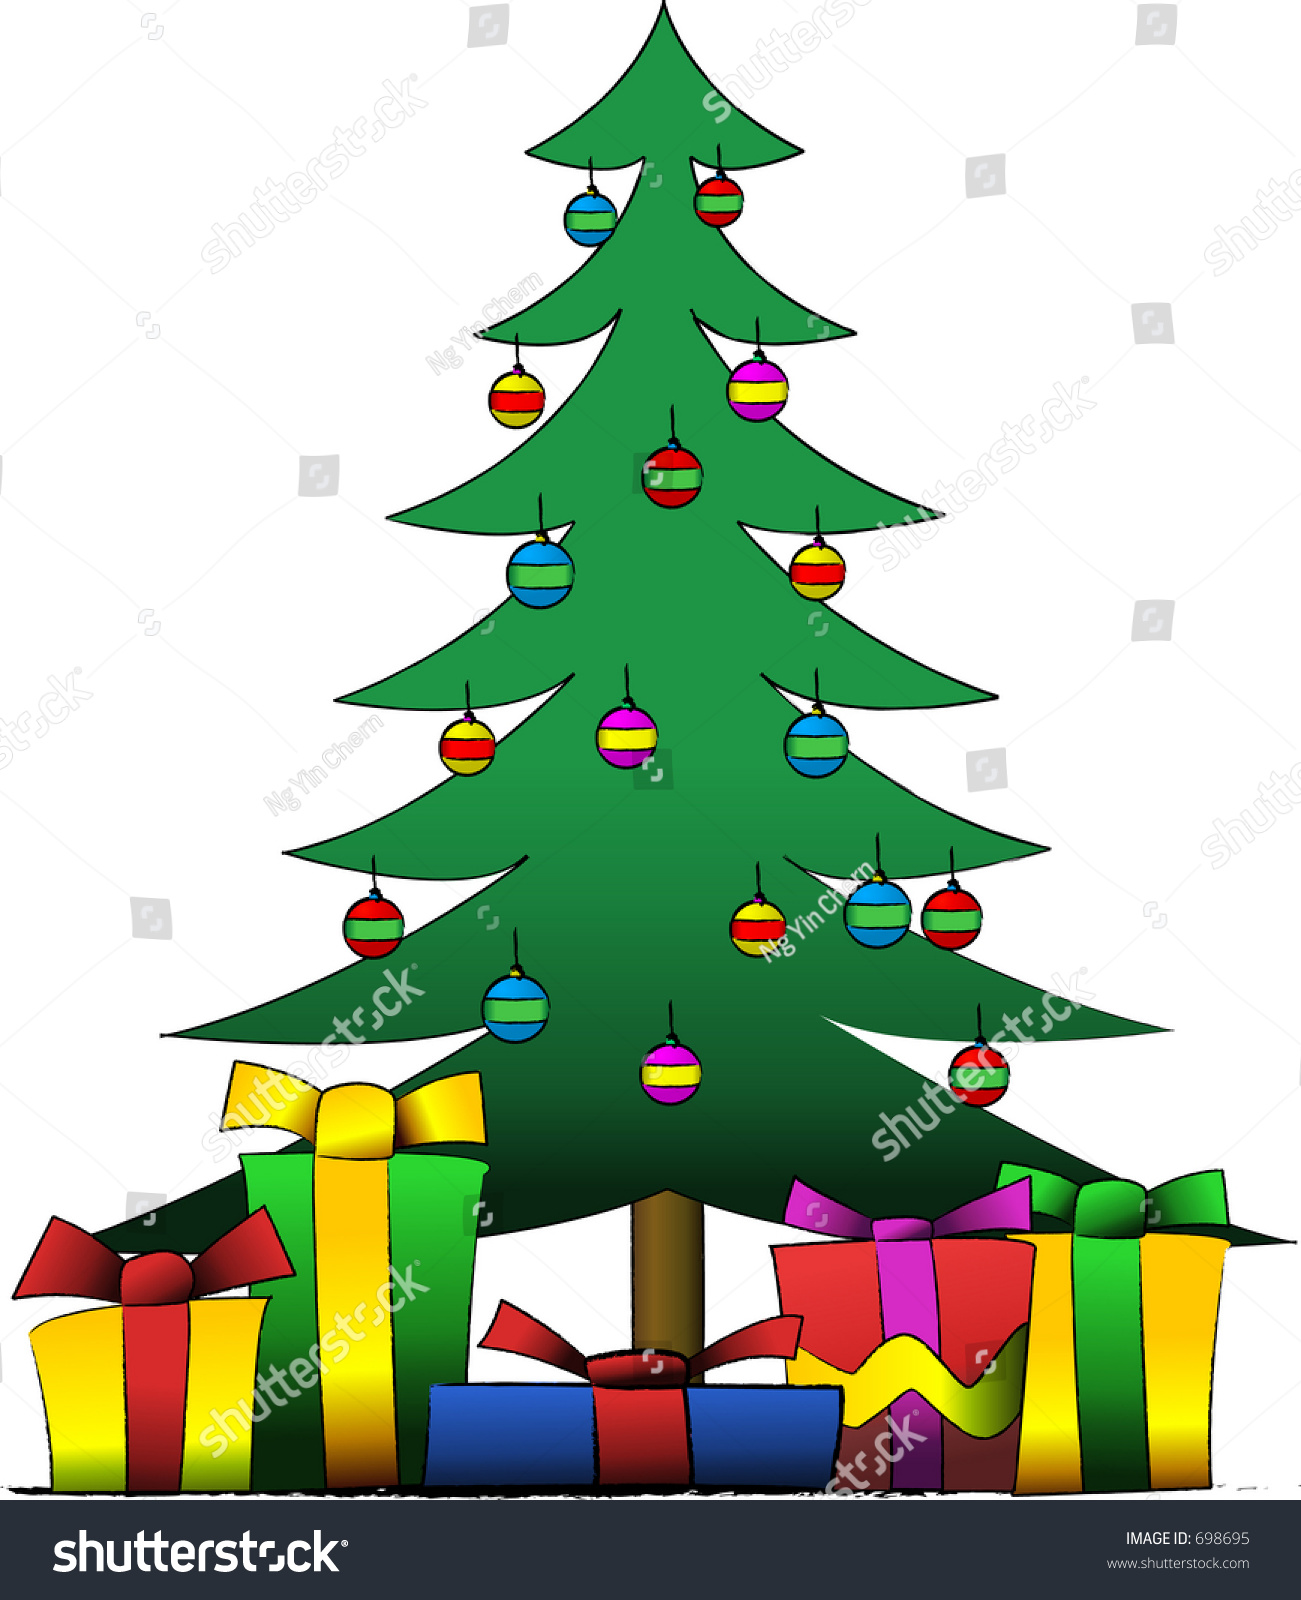 Vector Illustration Of A Decorated Christmas Tree With Presents Under